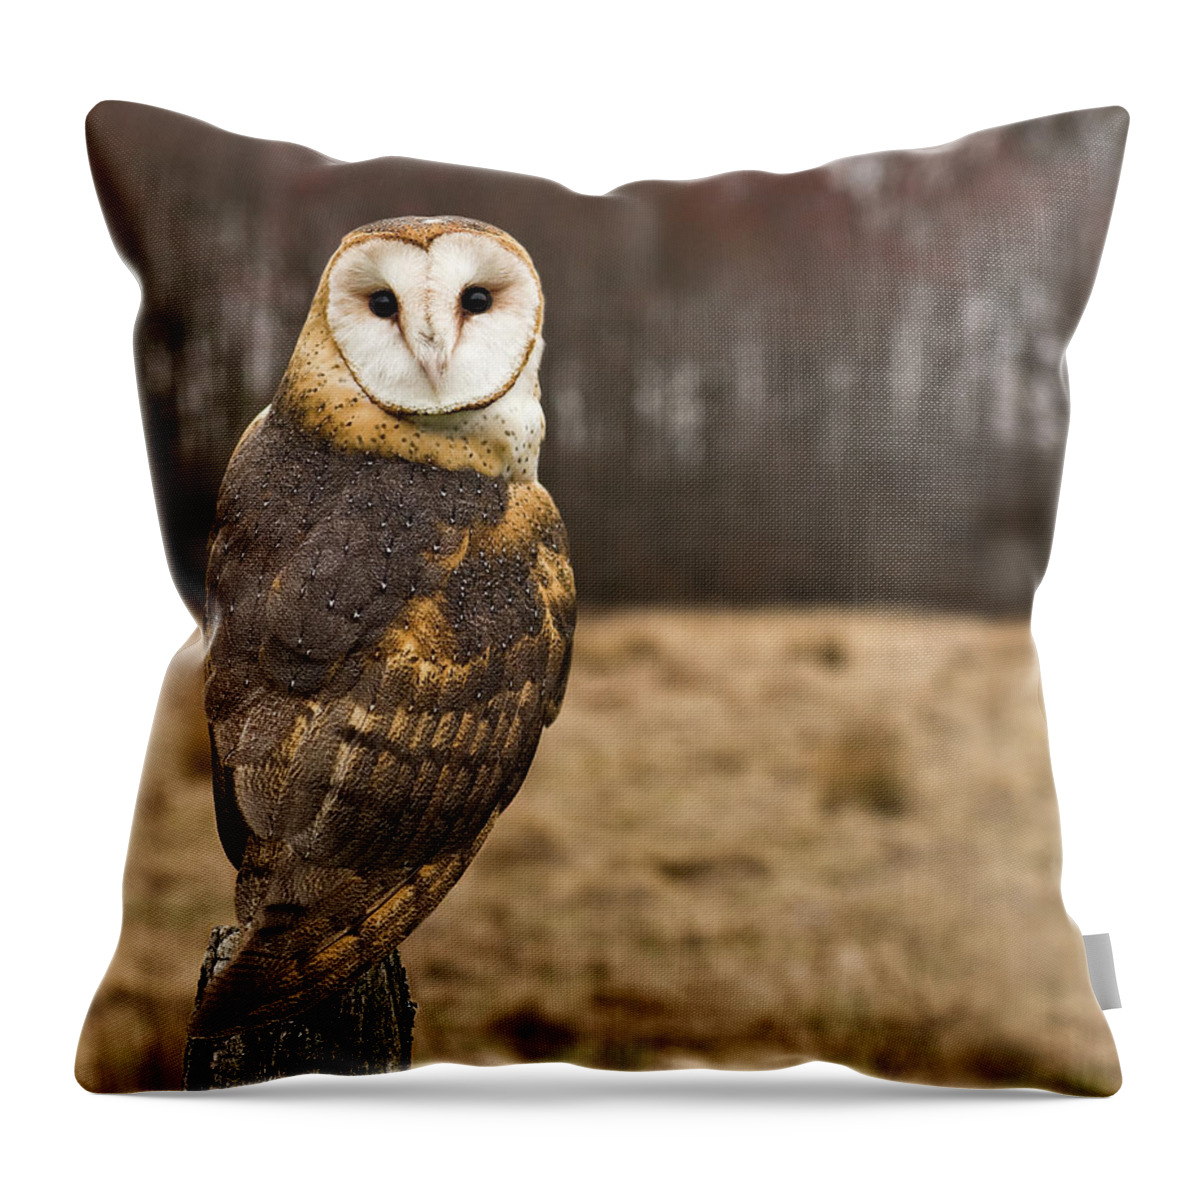 Alertness Throw Pillow featuring the photograph Owl Looking At Camera by Jody Trappe Photography